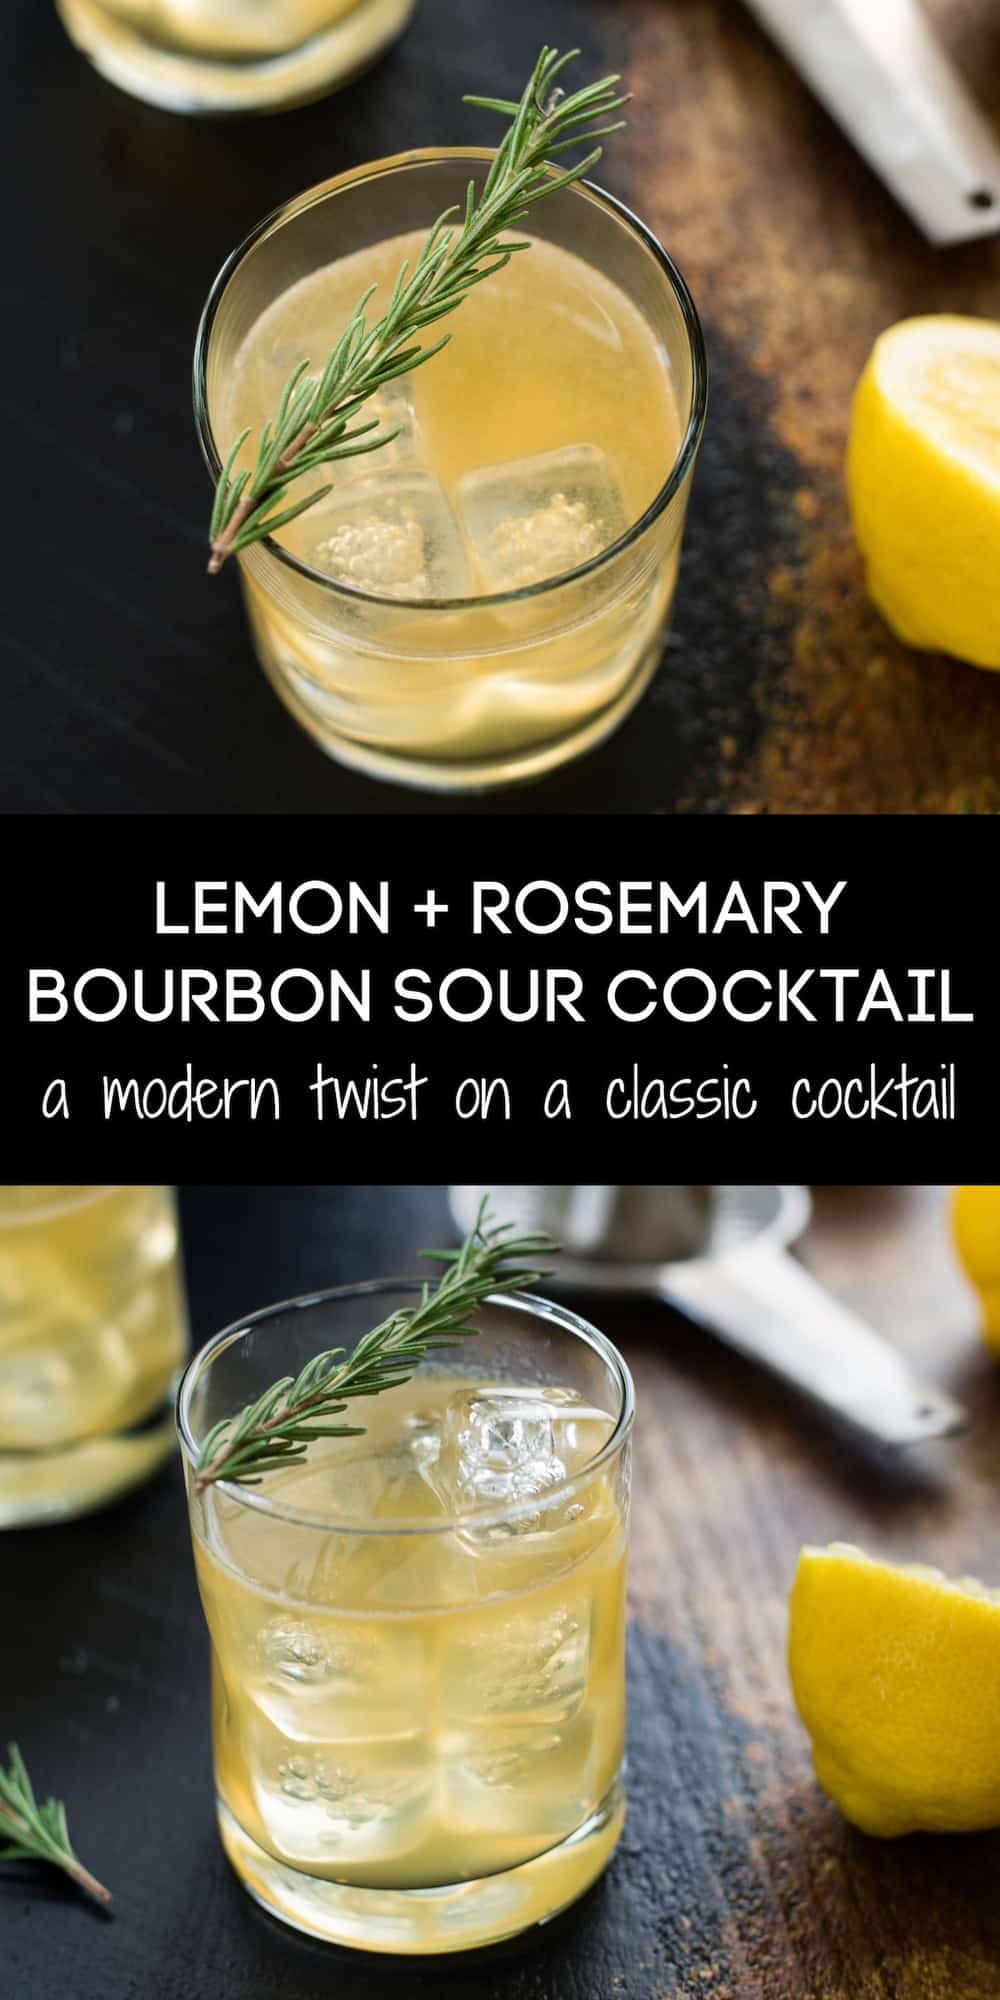 A collage of images of rosemary bourbon cocktails with an overlay: LEMON + ROSEMARY BOURBON SOUR COCKTAIL a modern twist on a classic cocktail.